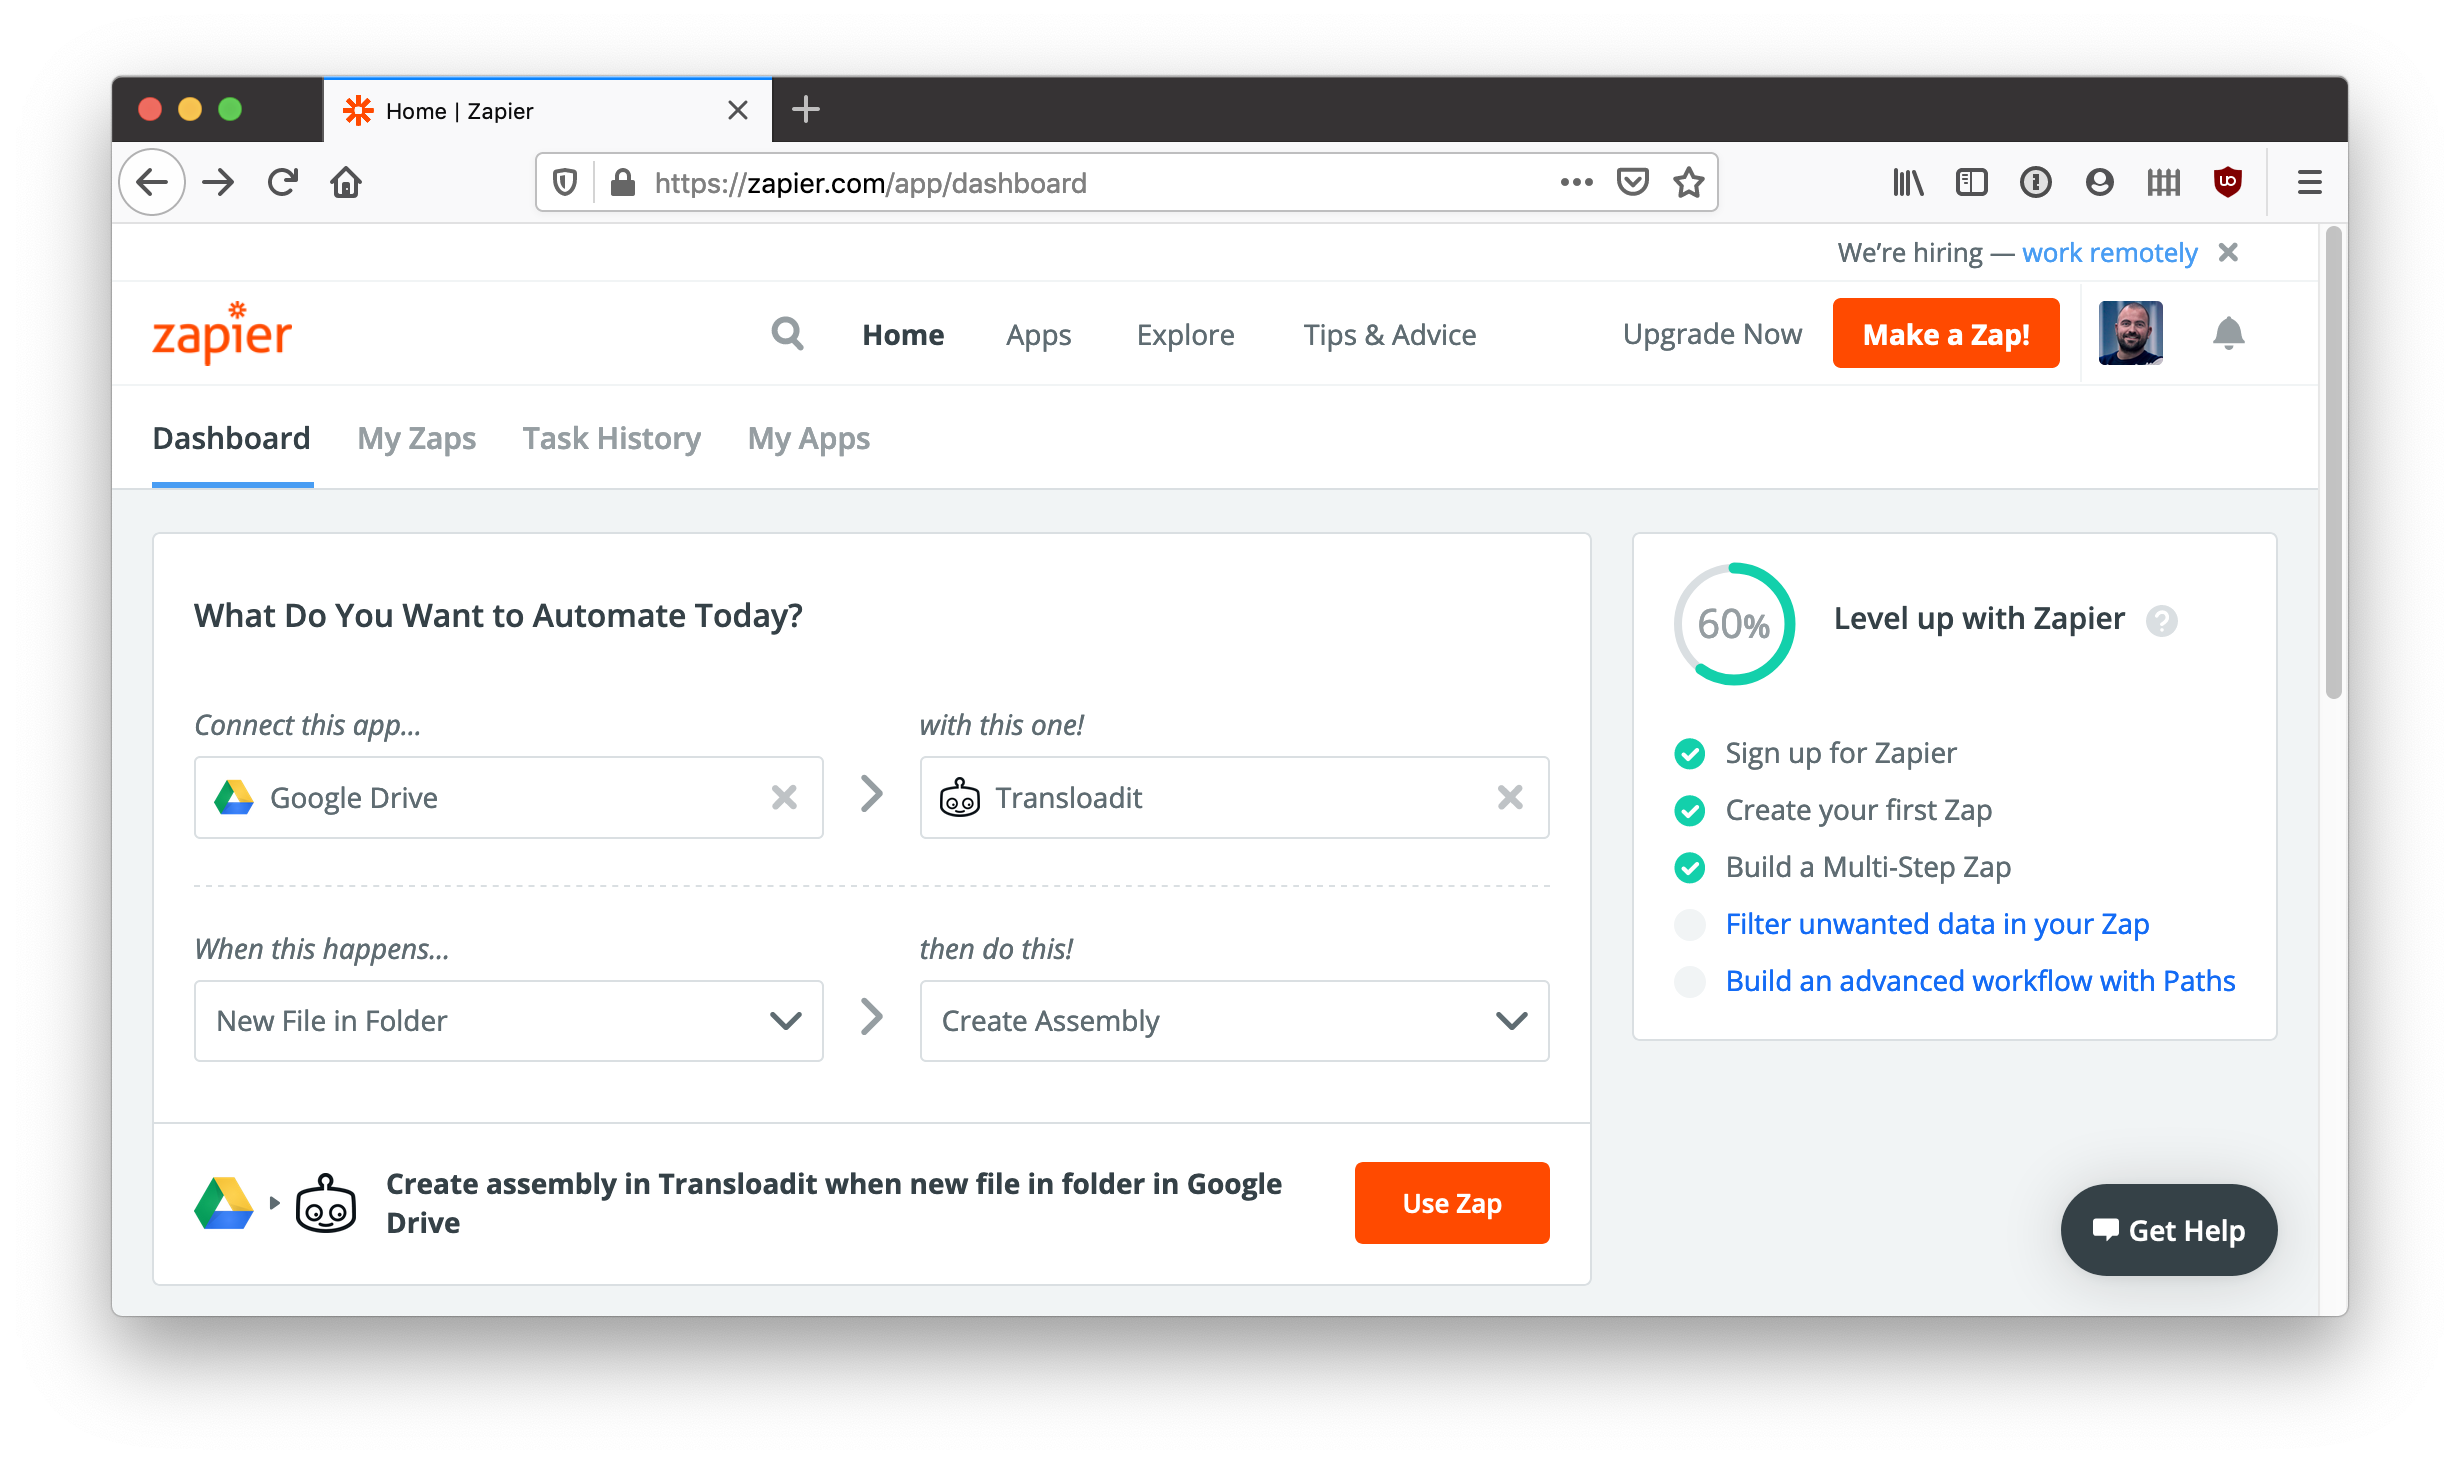 Creating a new Zap on Zapier to connect Google Drive with Transloadit